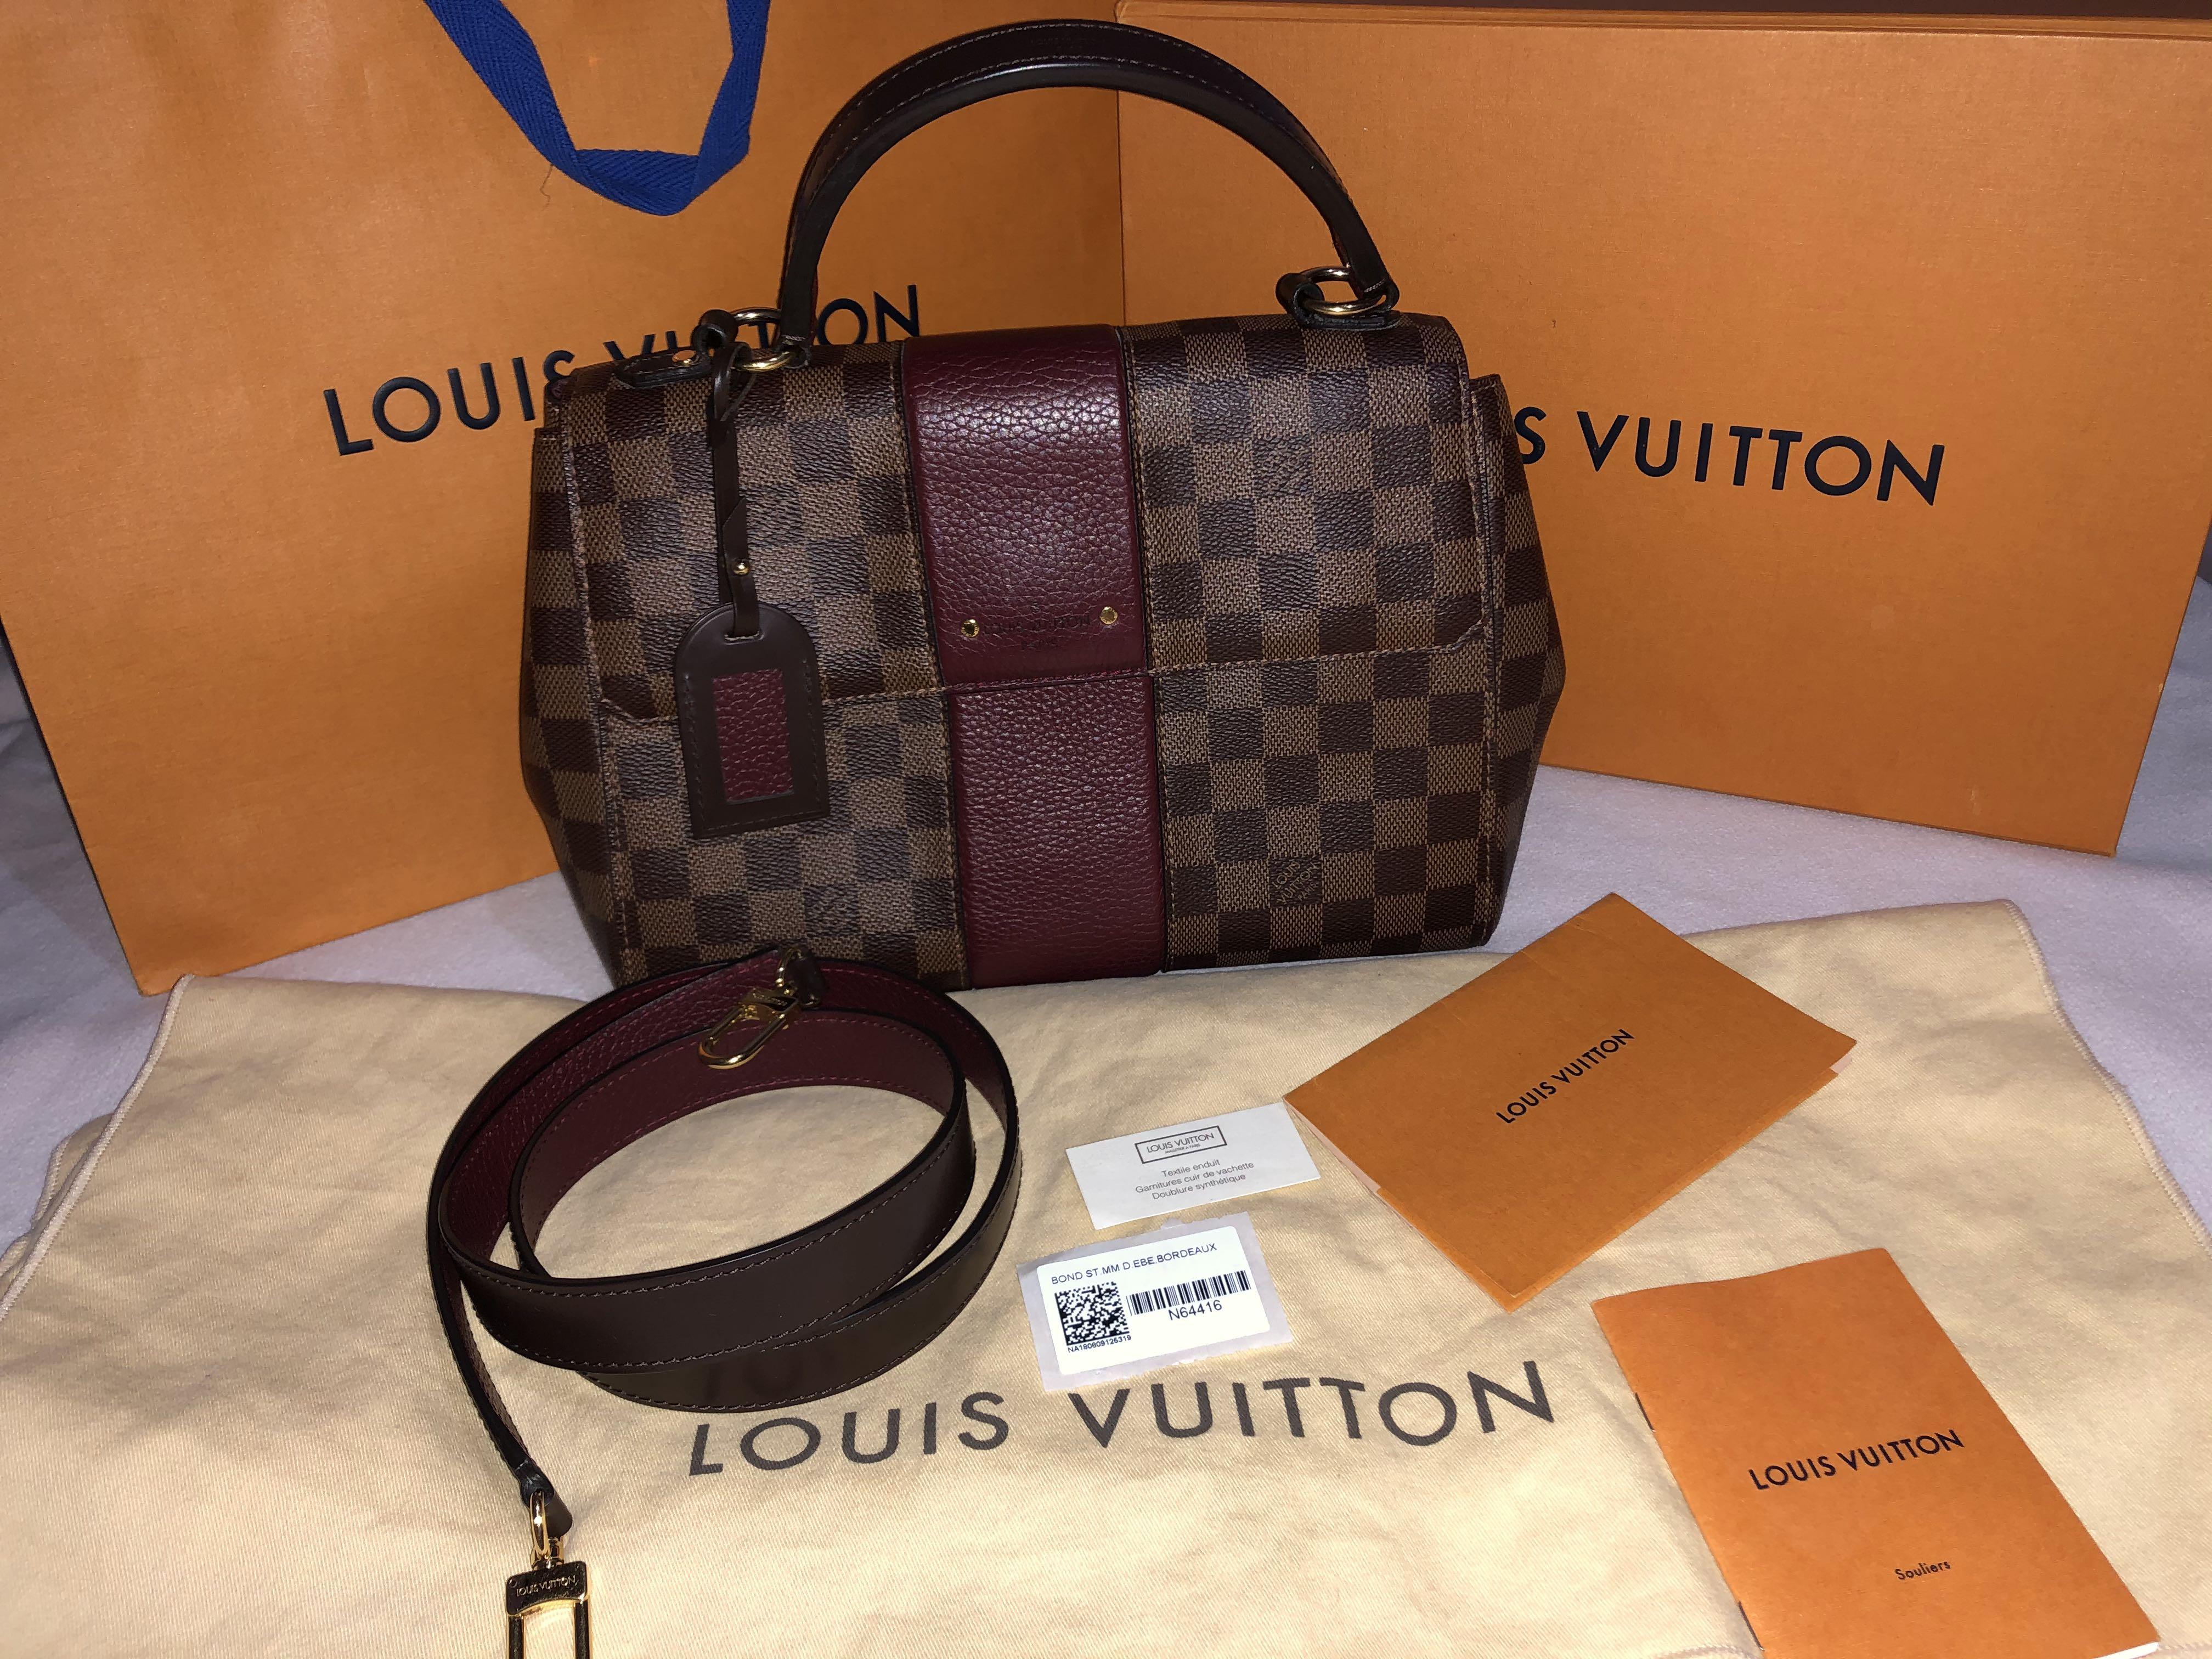 Louis Vuitton, After debating whether to go for cluny bb or croisette..